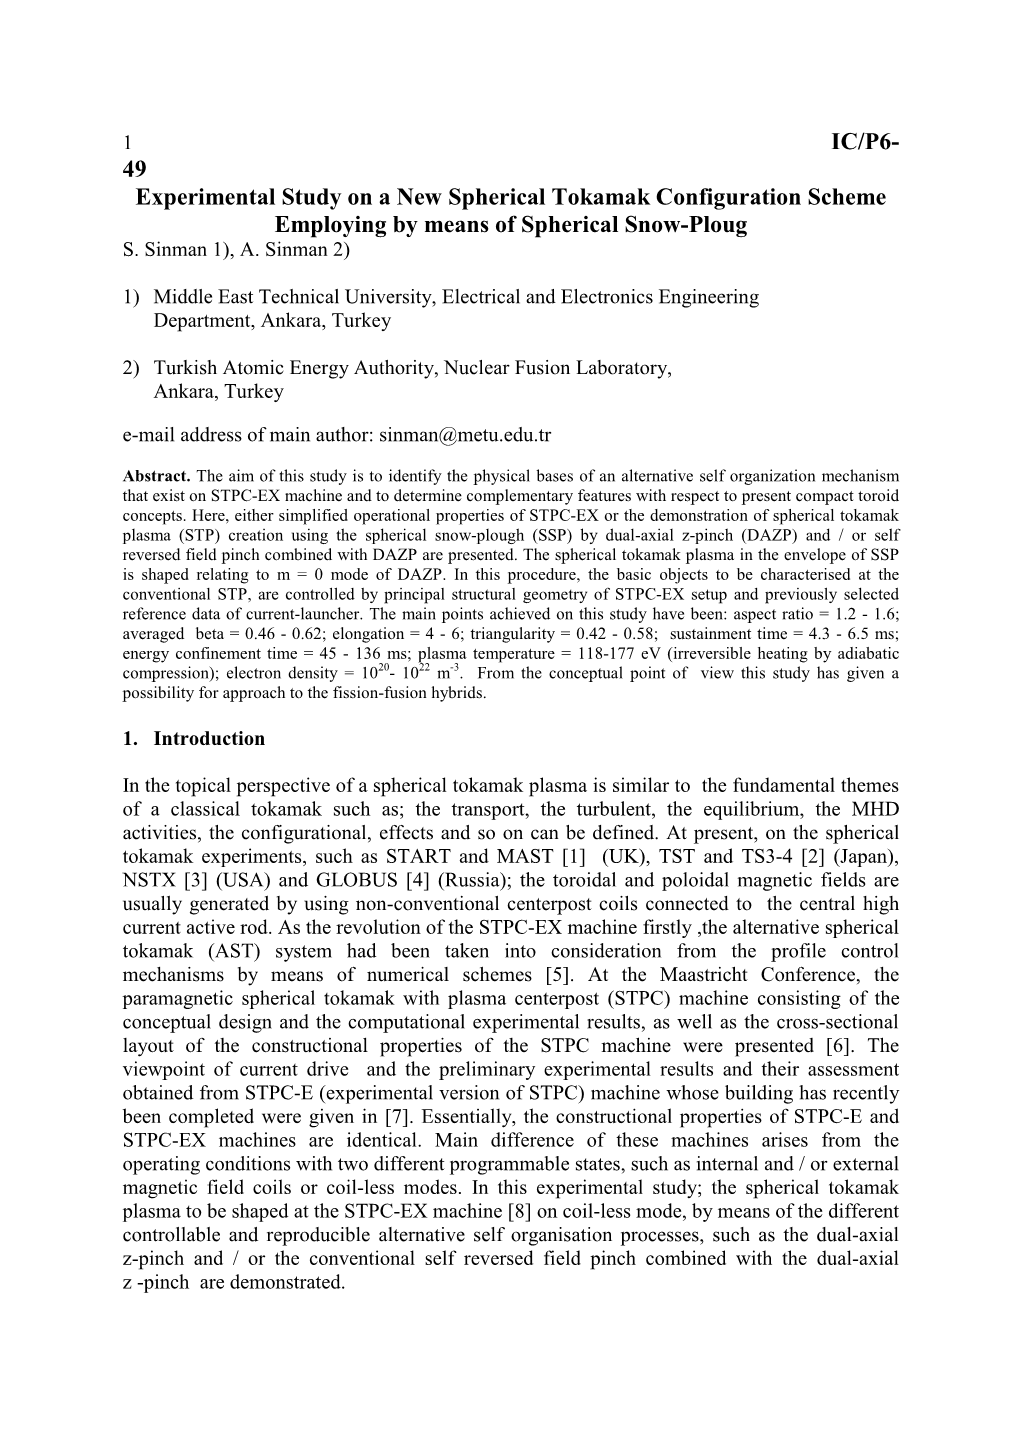 IC/P6- 49 Experimental Study on a New Spherical Tokamak Configuration Scheme Employing by Means of Spherical Snow-Ploug S